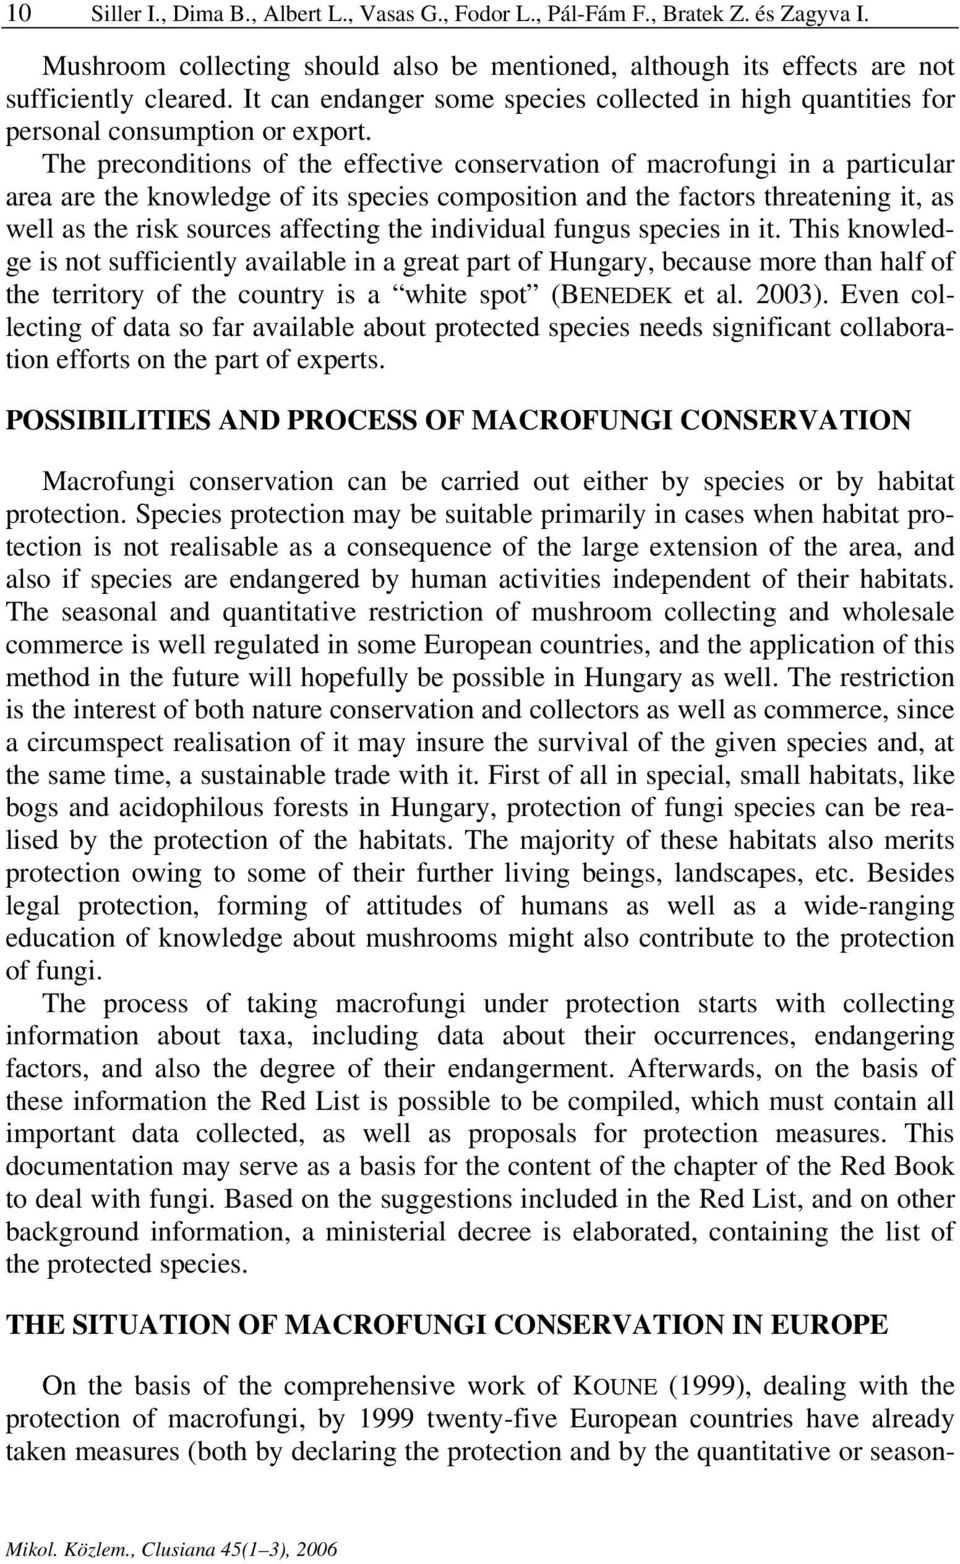 The preconditions of the effective conservation of macrofungi in a particular area are the knowledge of its species composition and the factors threatening it, as well as the risk sources affecting